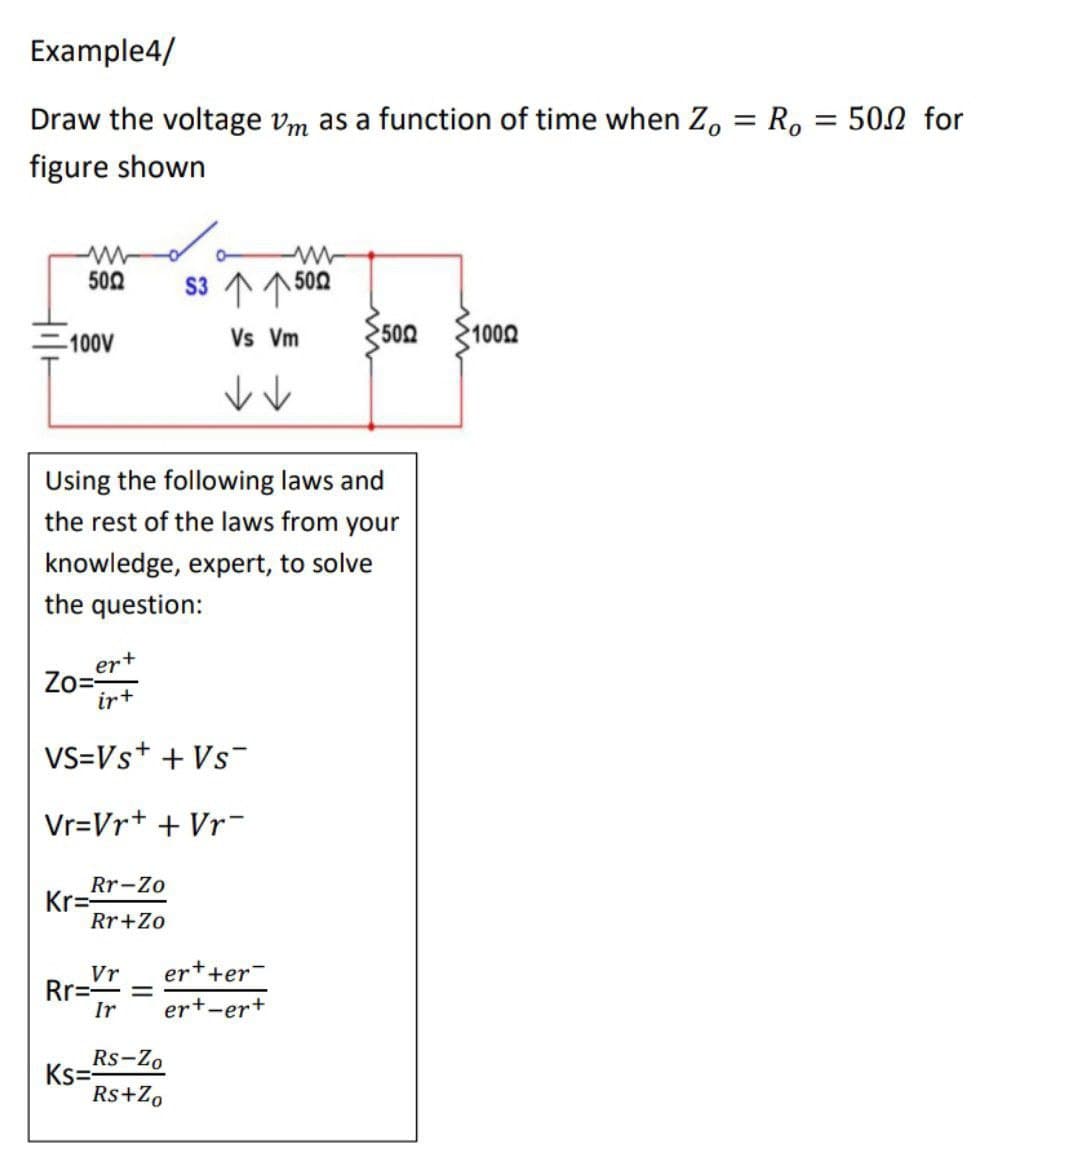 Example4/
Draw the voltage Vm as a function of time when Zo = Ro = 500 for
figure shown
www
5002
S3 个个502
Vs Vm
5002 1000
-100V
↓↓
Using the following laws and
the rest of the laws from your
knowledge, expert, to solve
the question:
ert
Zo=-
ir+
VS=Vs+ + VS™
Vr=Vr+ + Vr
Rr-Zo
Kr=
Rr+Zo
Vr er++er
Rr=- =
Ir ert-er+
Rs-Zo
Ks=
Rs+Zo